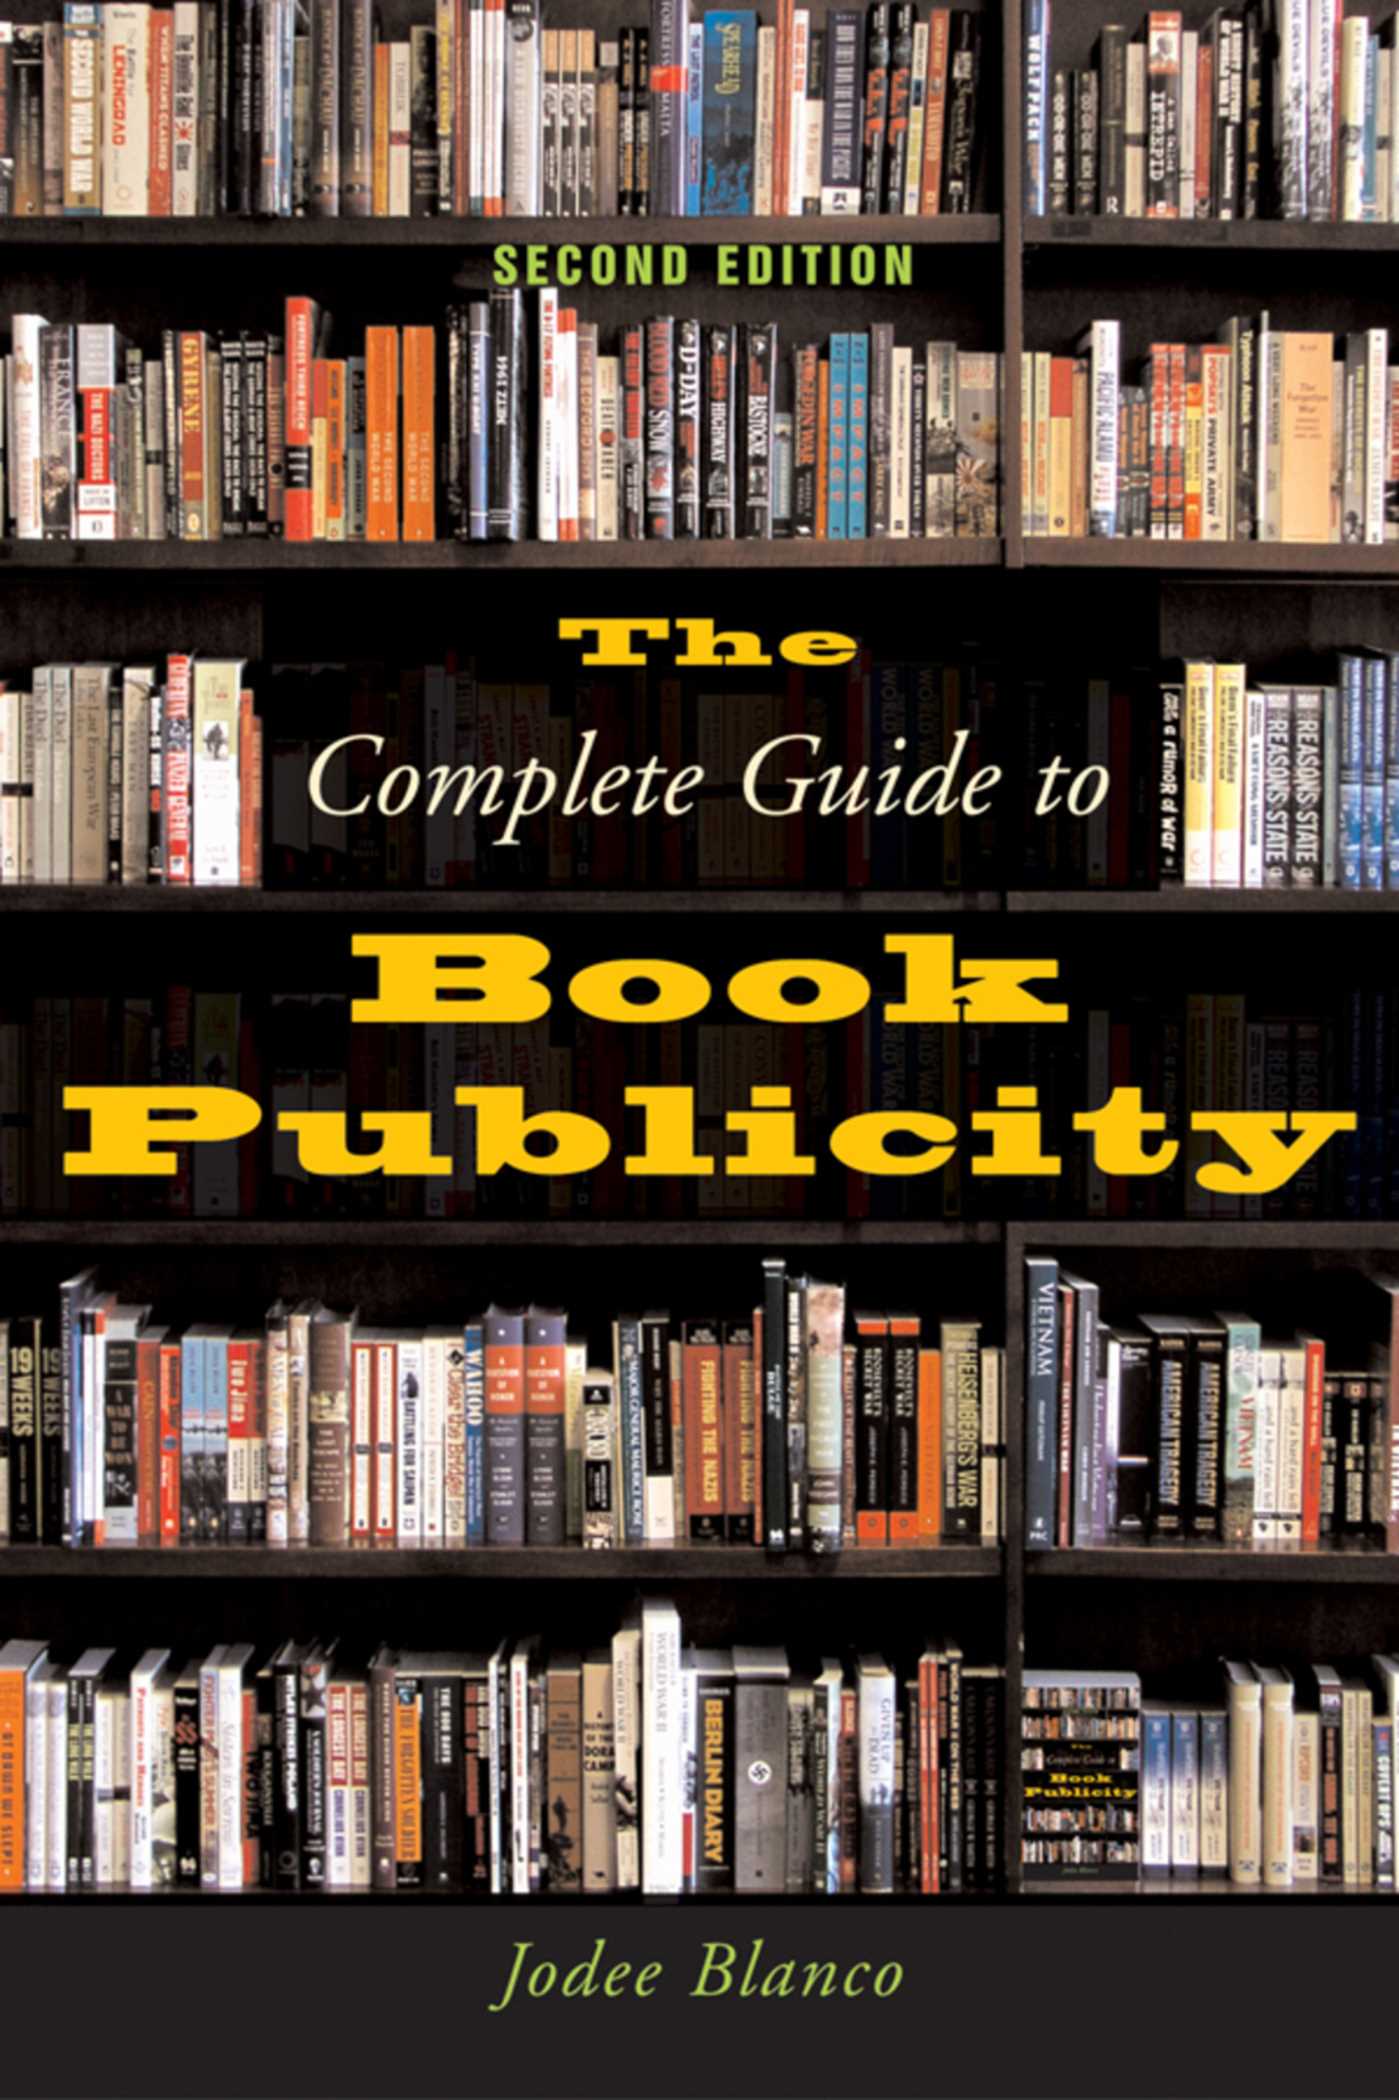 The Complete Guide to Book Publicity - 10-14.99